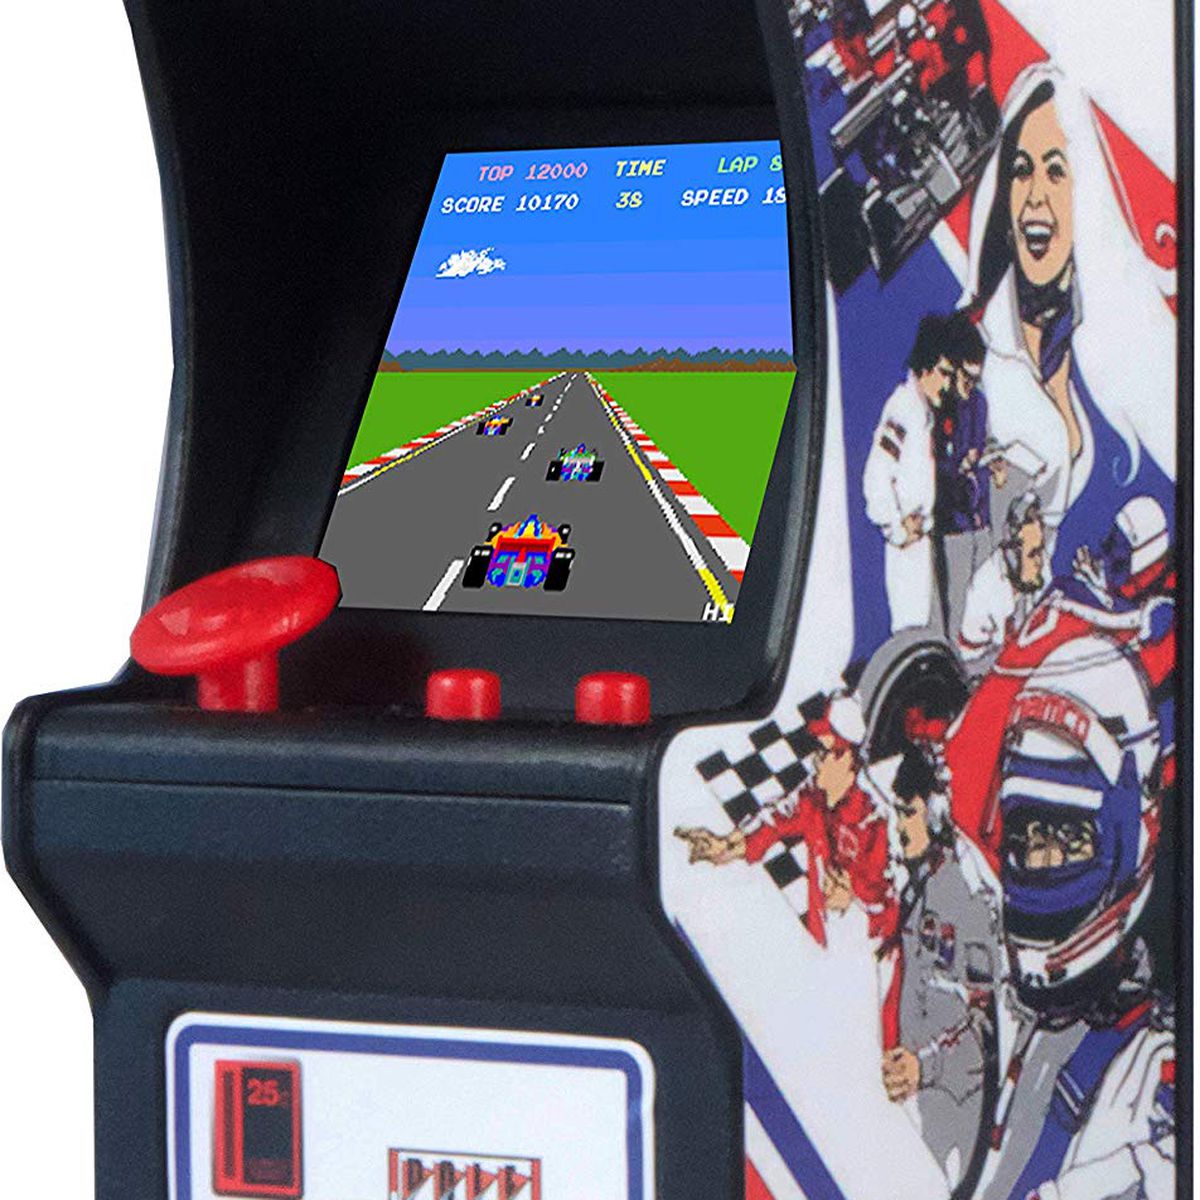 A product shot of the Tiny Arcade Pole Position cabinet